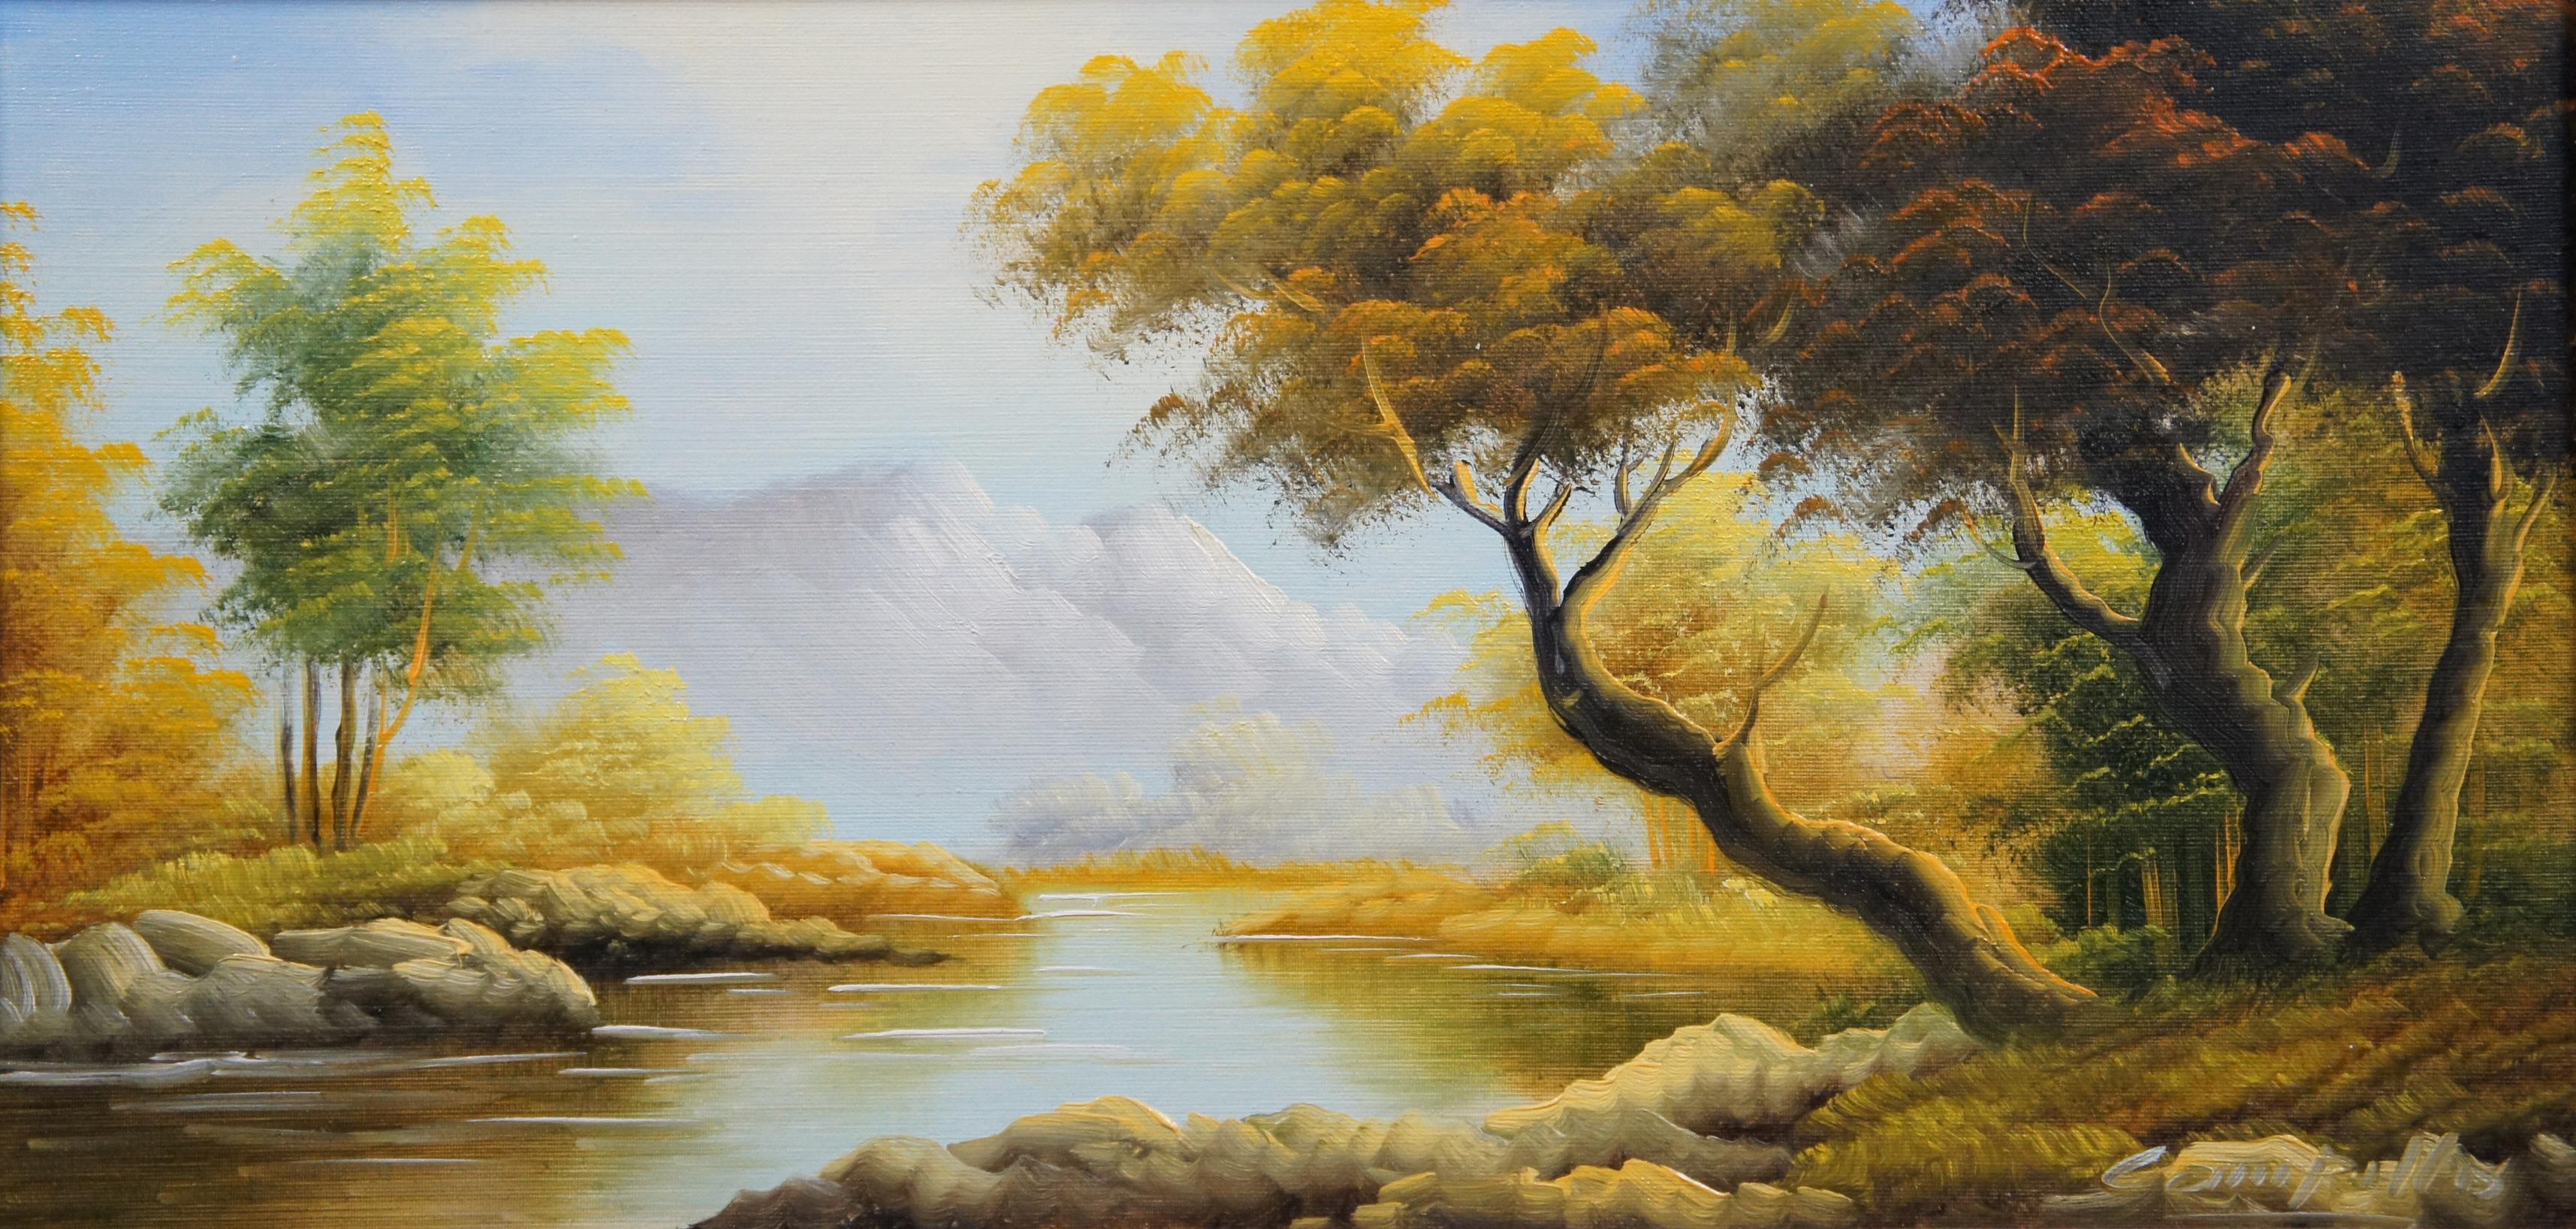 Original Oil Painting on Canvas by Campillo Autumn River Mountain Landscape 3